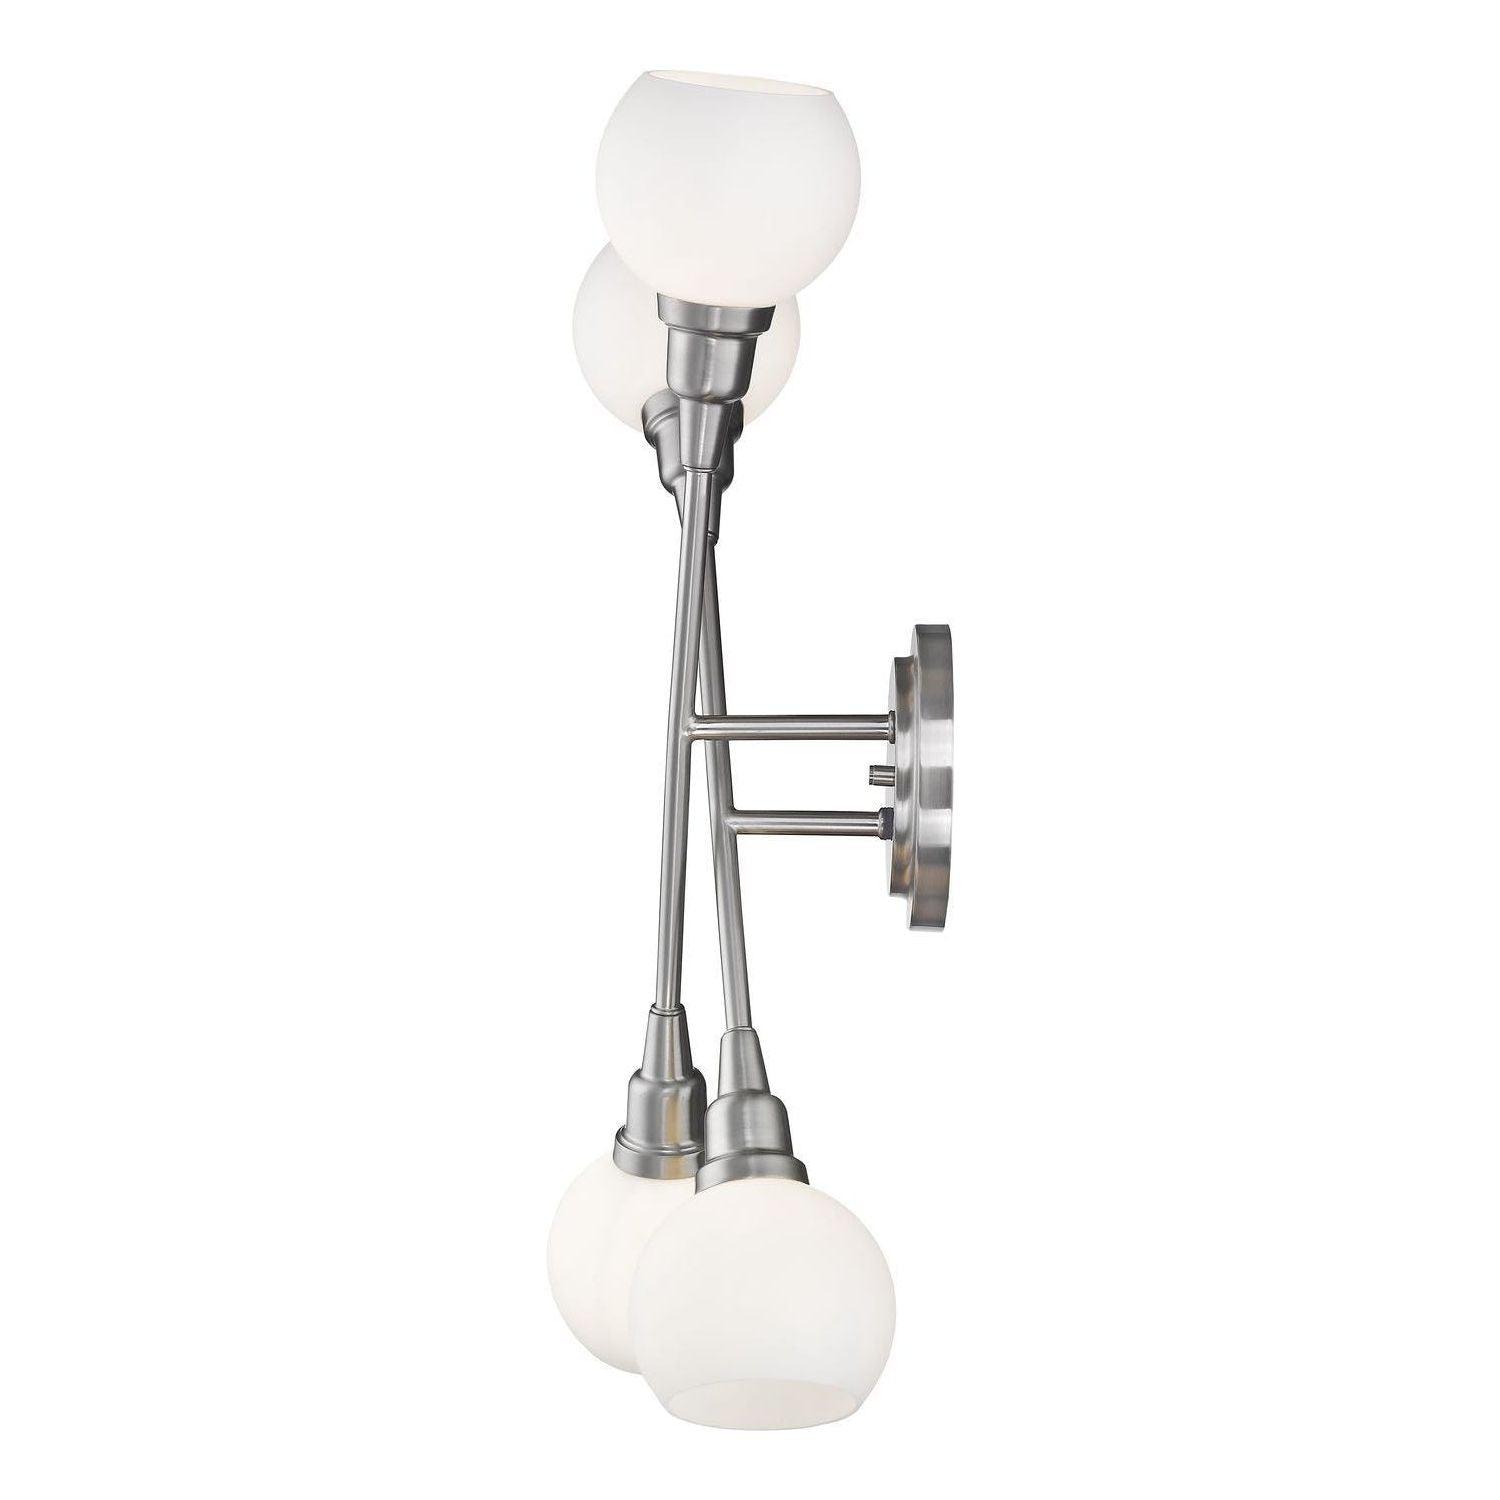 Z-Lite - Tian Wall Sconce - Lights Canada